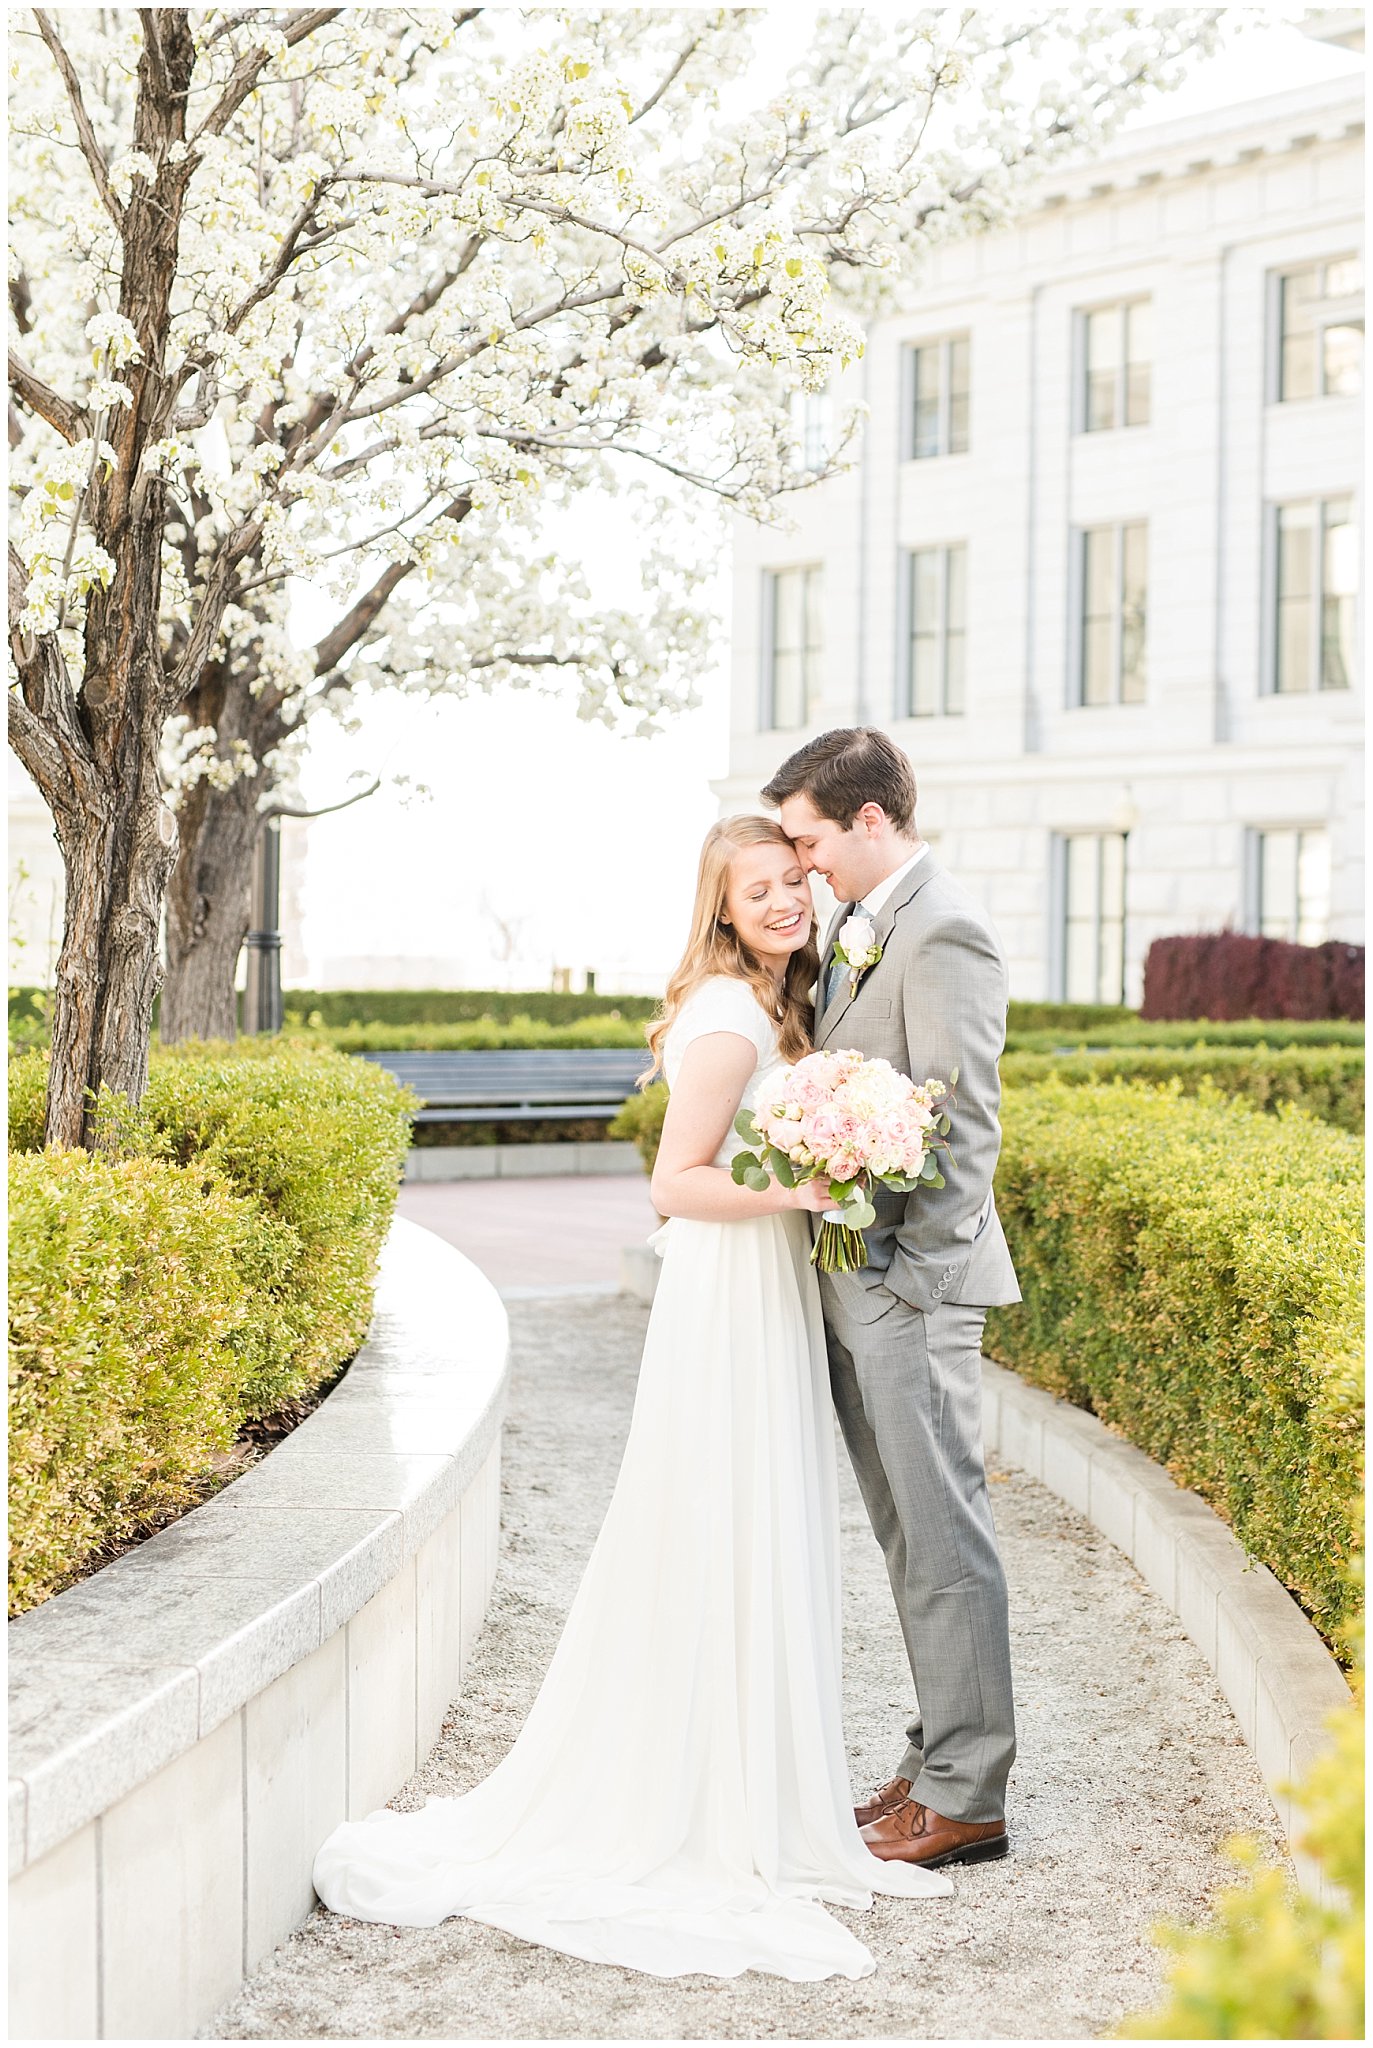 Bride with blush bouquet and groom with grey suit in the blossoms | Utah State Capitol Blossoms Formal Session | Salt Lake Wedding Photographers | Jessie and Dallin Photography